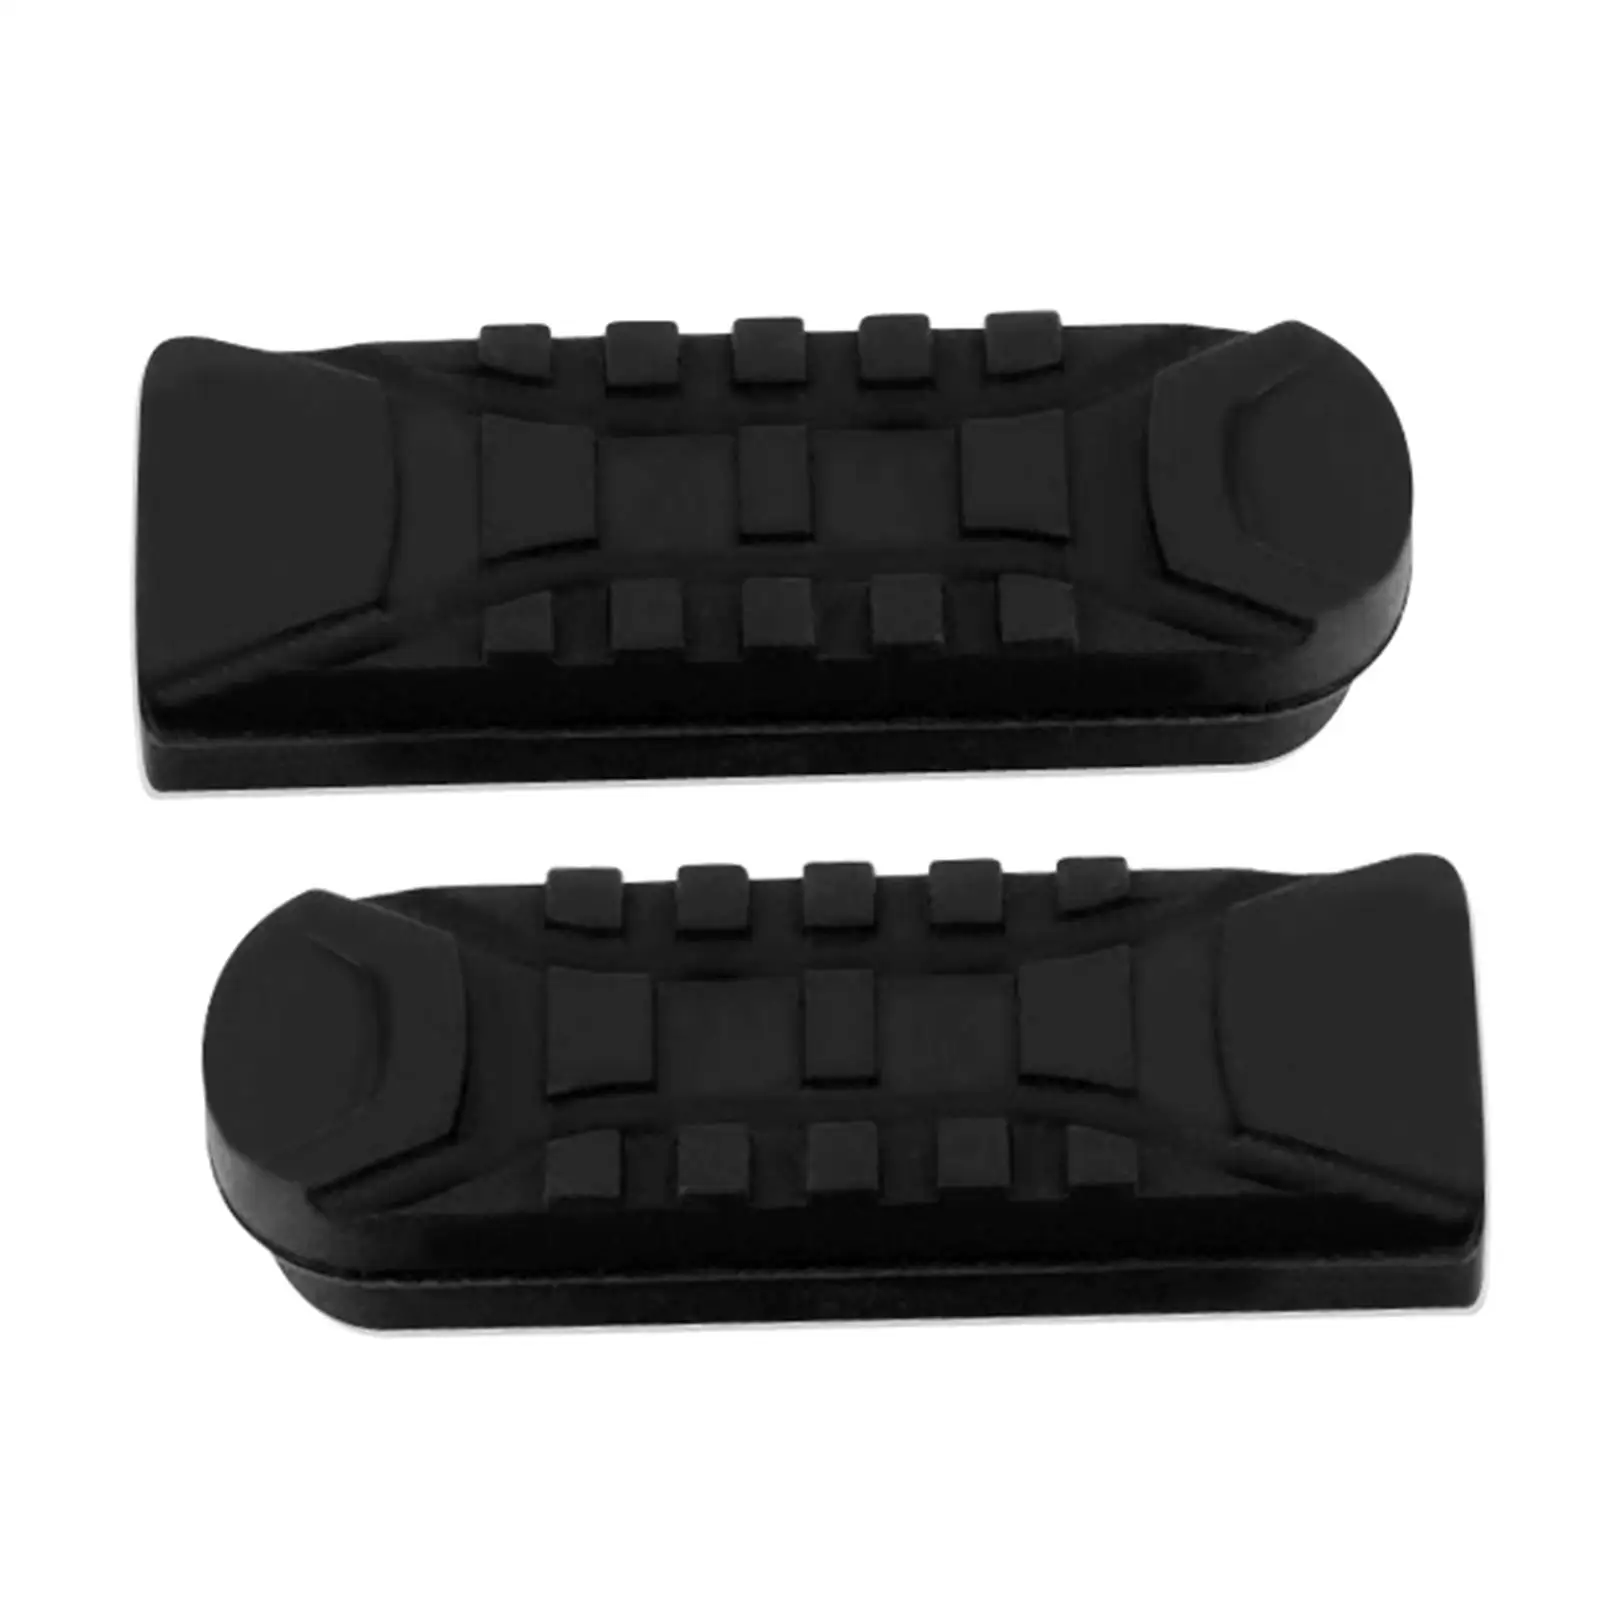 2Pcs Motorcycle Front Footrest Left and Right Rubber Foot Pedals for BMW R1200GS LC Adv F850GS F750GS Accessories Durable